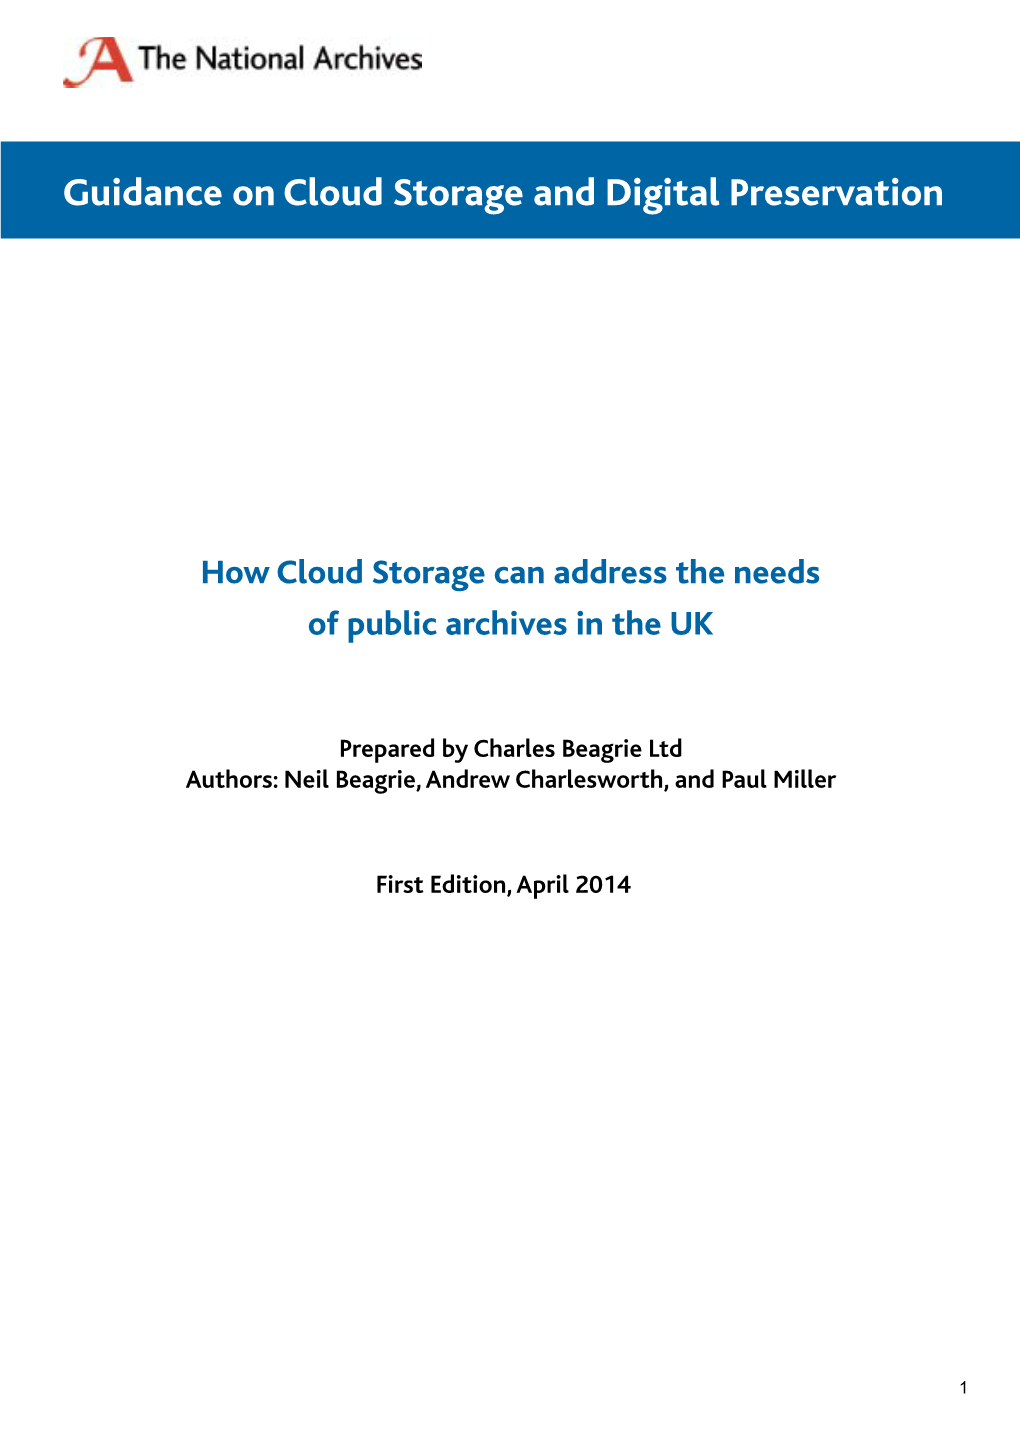 Guidance on Cloud Storage and Digital Preservation